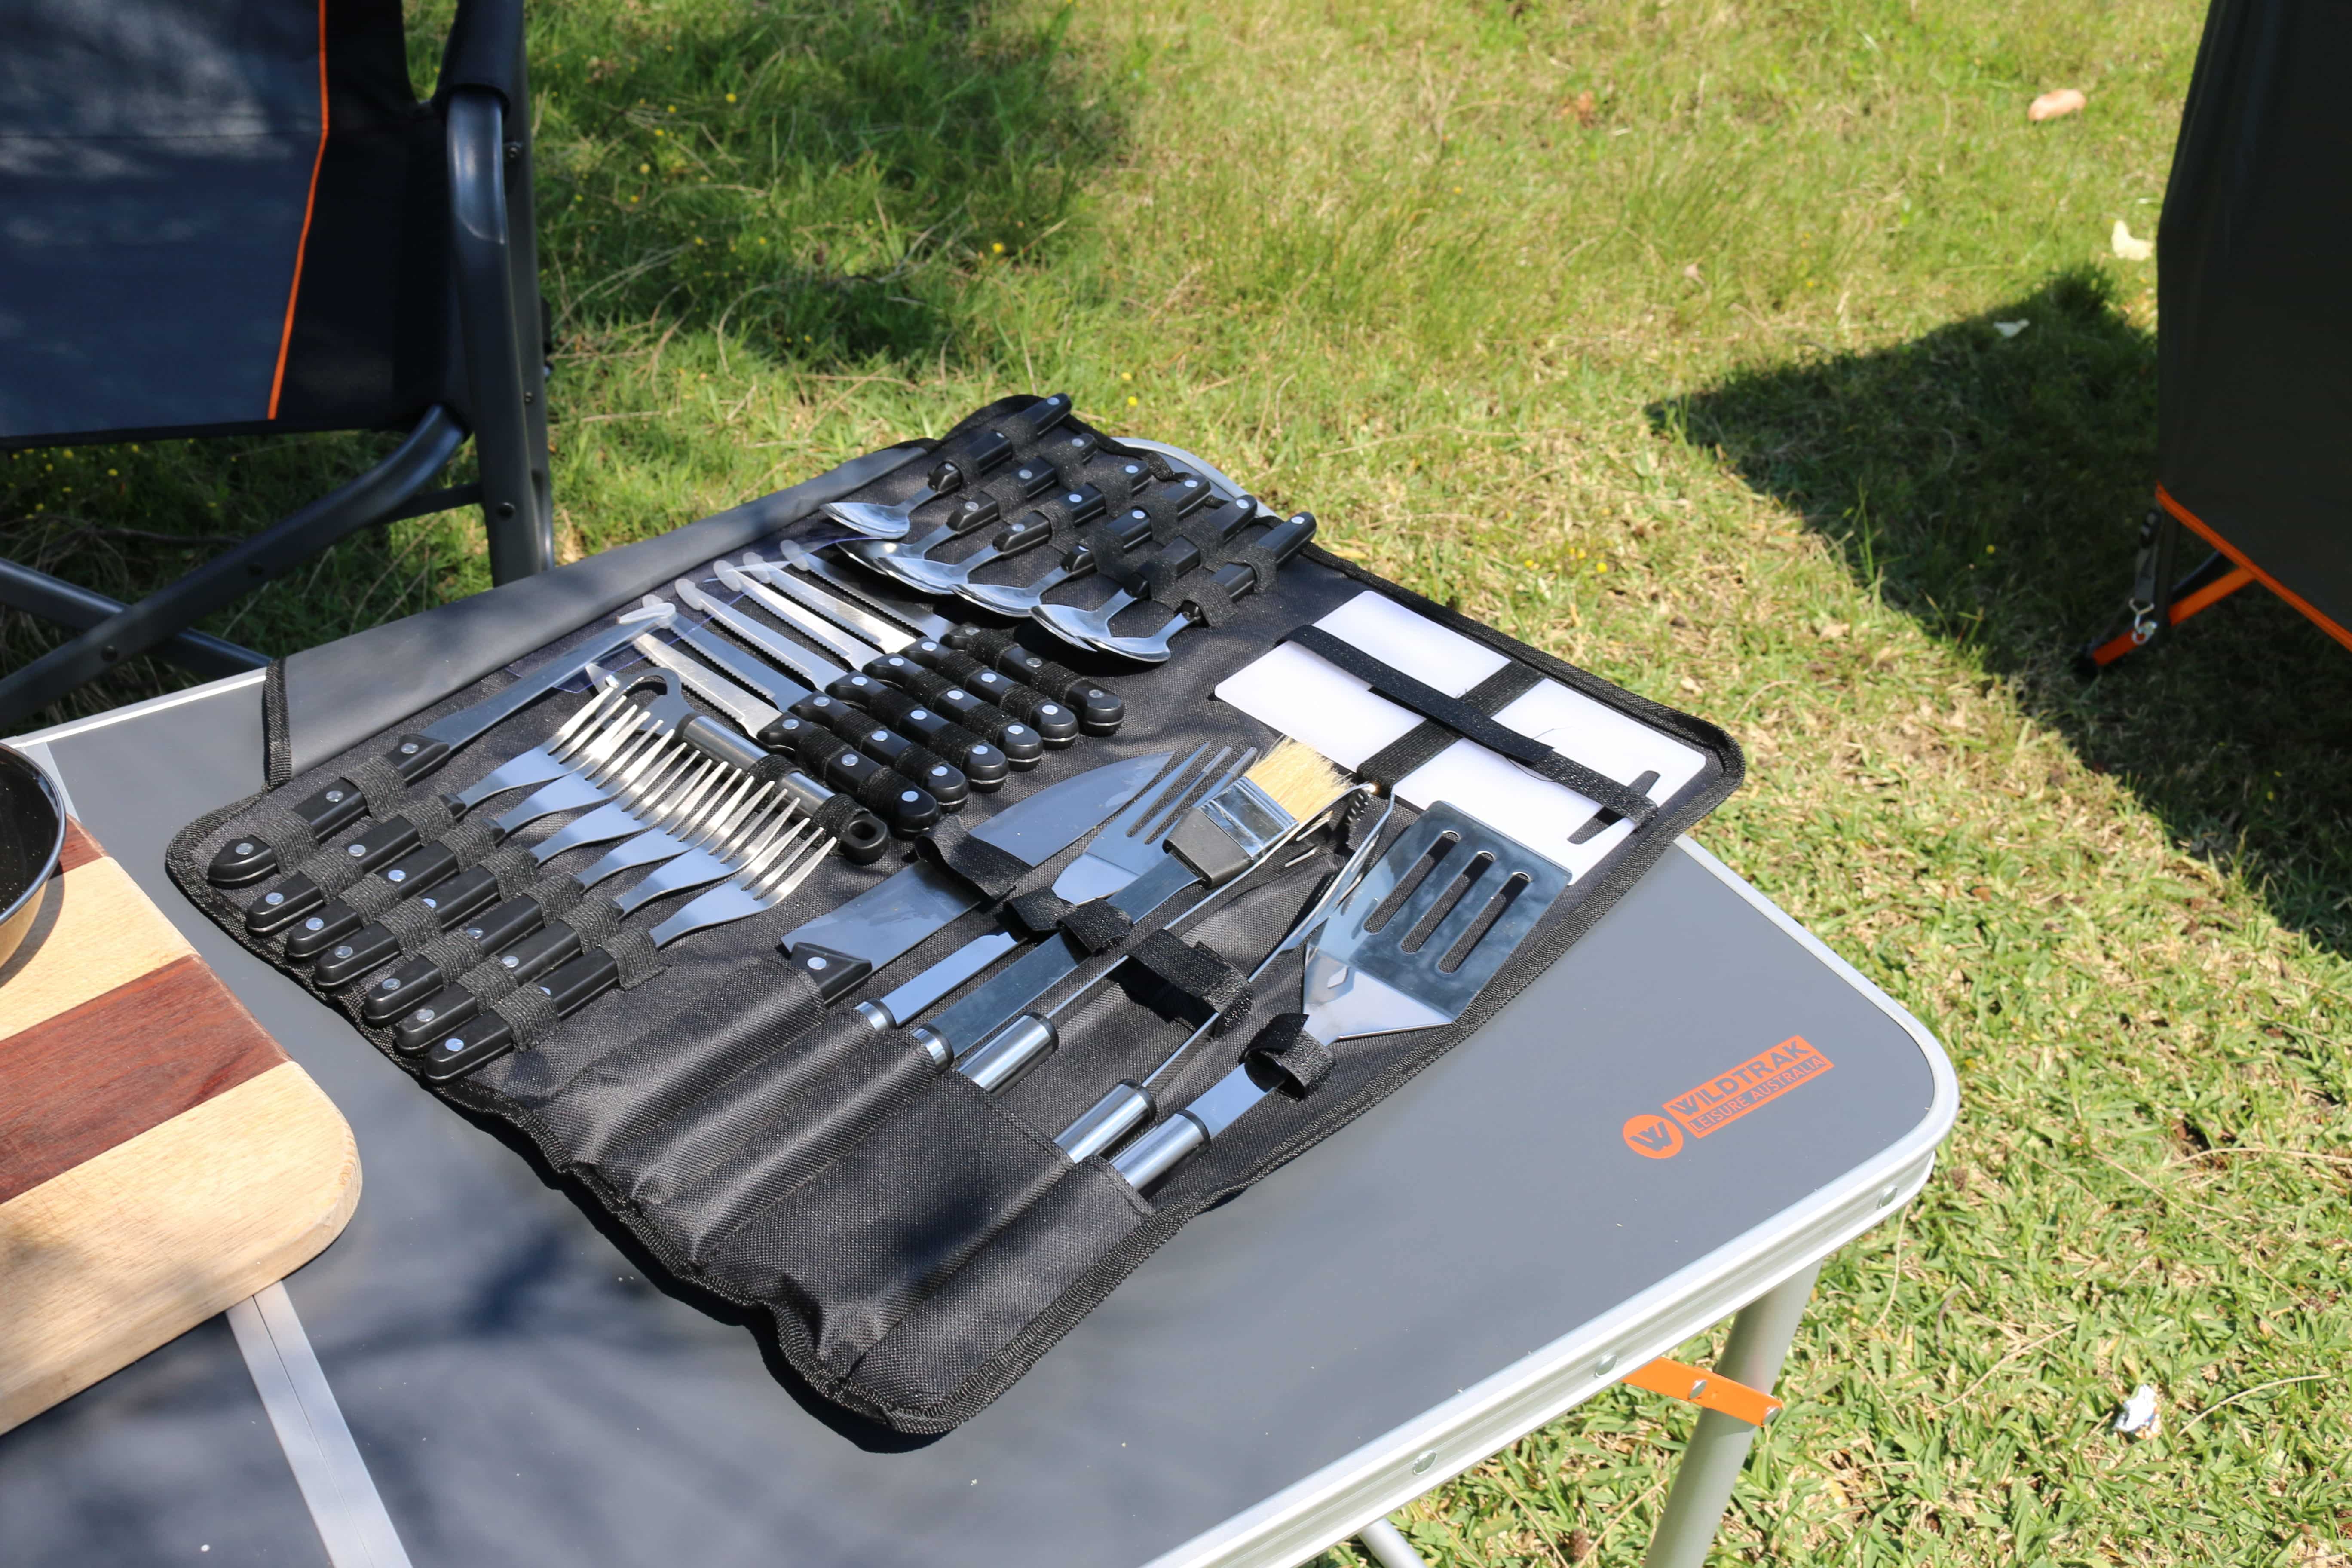 26 PIECE STAINLESS STEEL CUTLERY AND BBQ SET